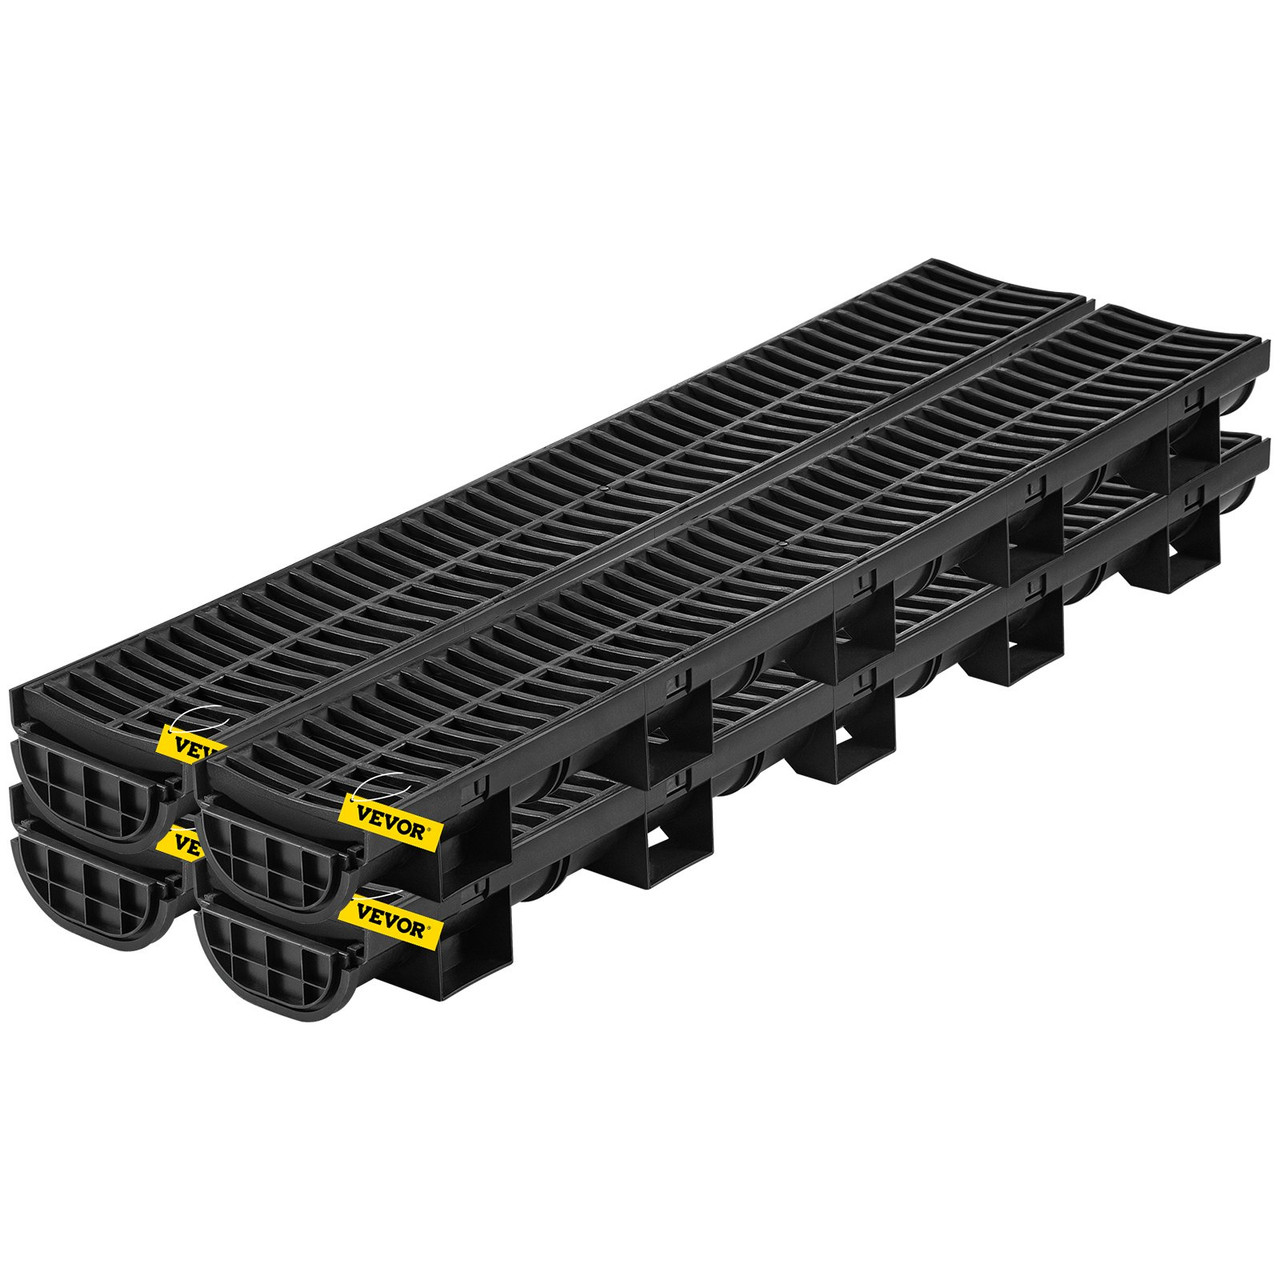 Trench Drain System, Channel Drain with Plastic Grate, 5.7x3.1-Inch HDPE Drainage Trench, Black Plastic Garage Floor Drain, 4x39 Trench Drain Grate, with 4 End Caps, for Garden, Driveway-4 Pack